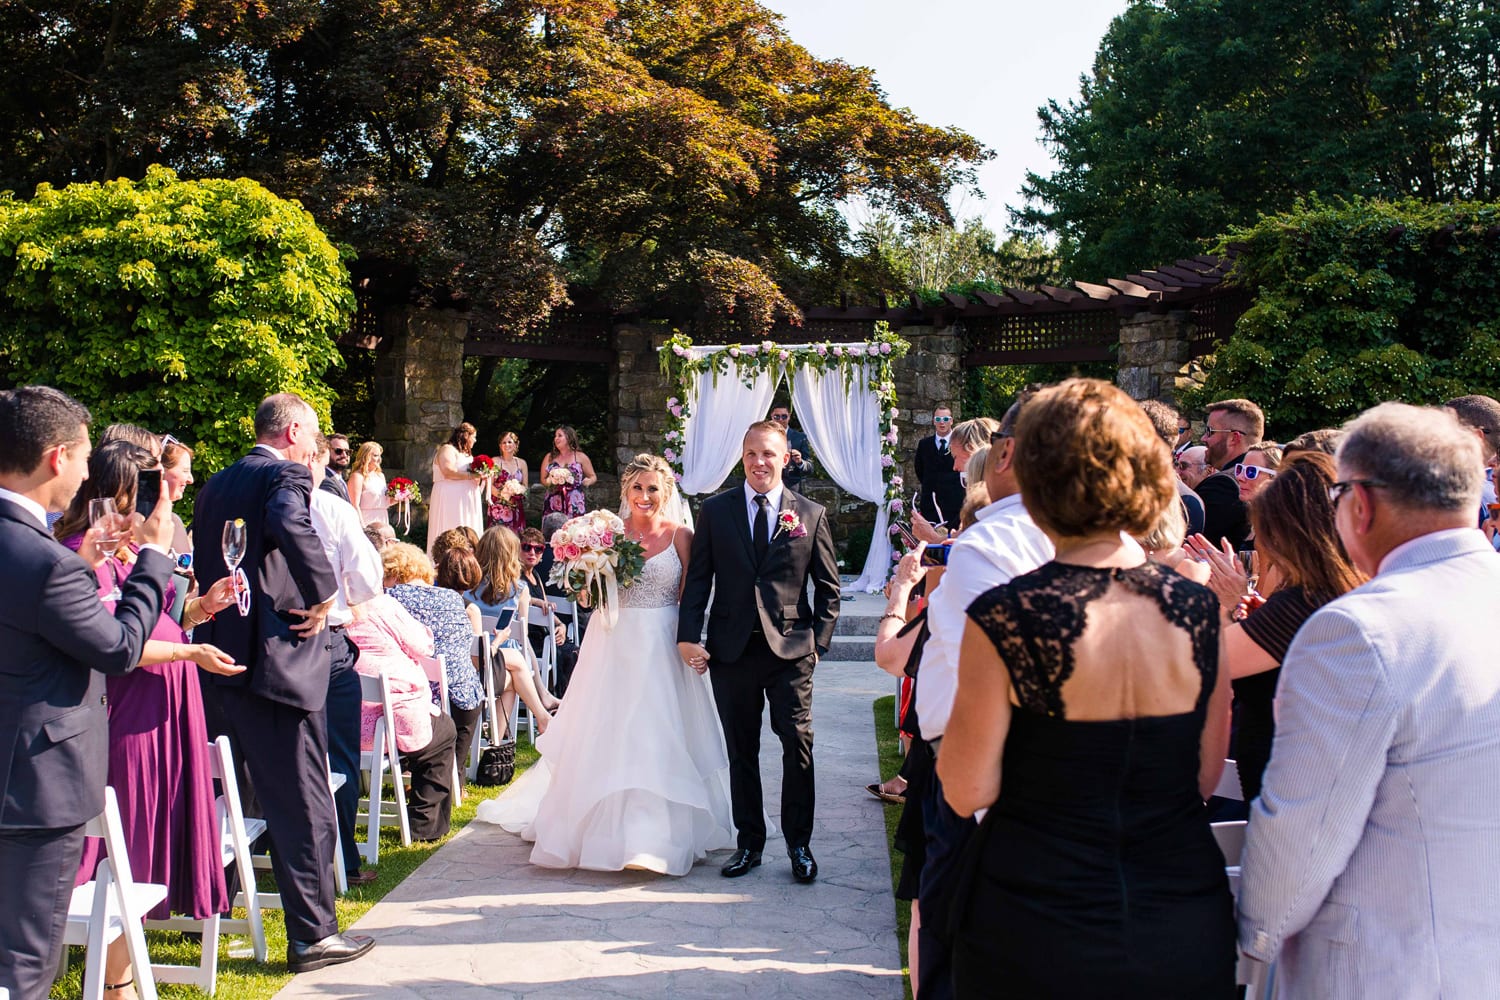 Outdoor wedding at Le Chateau in South Salem, NY